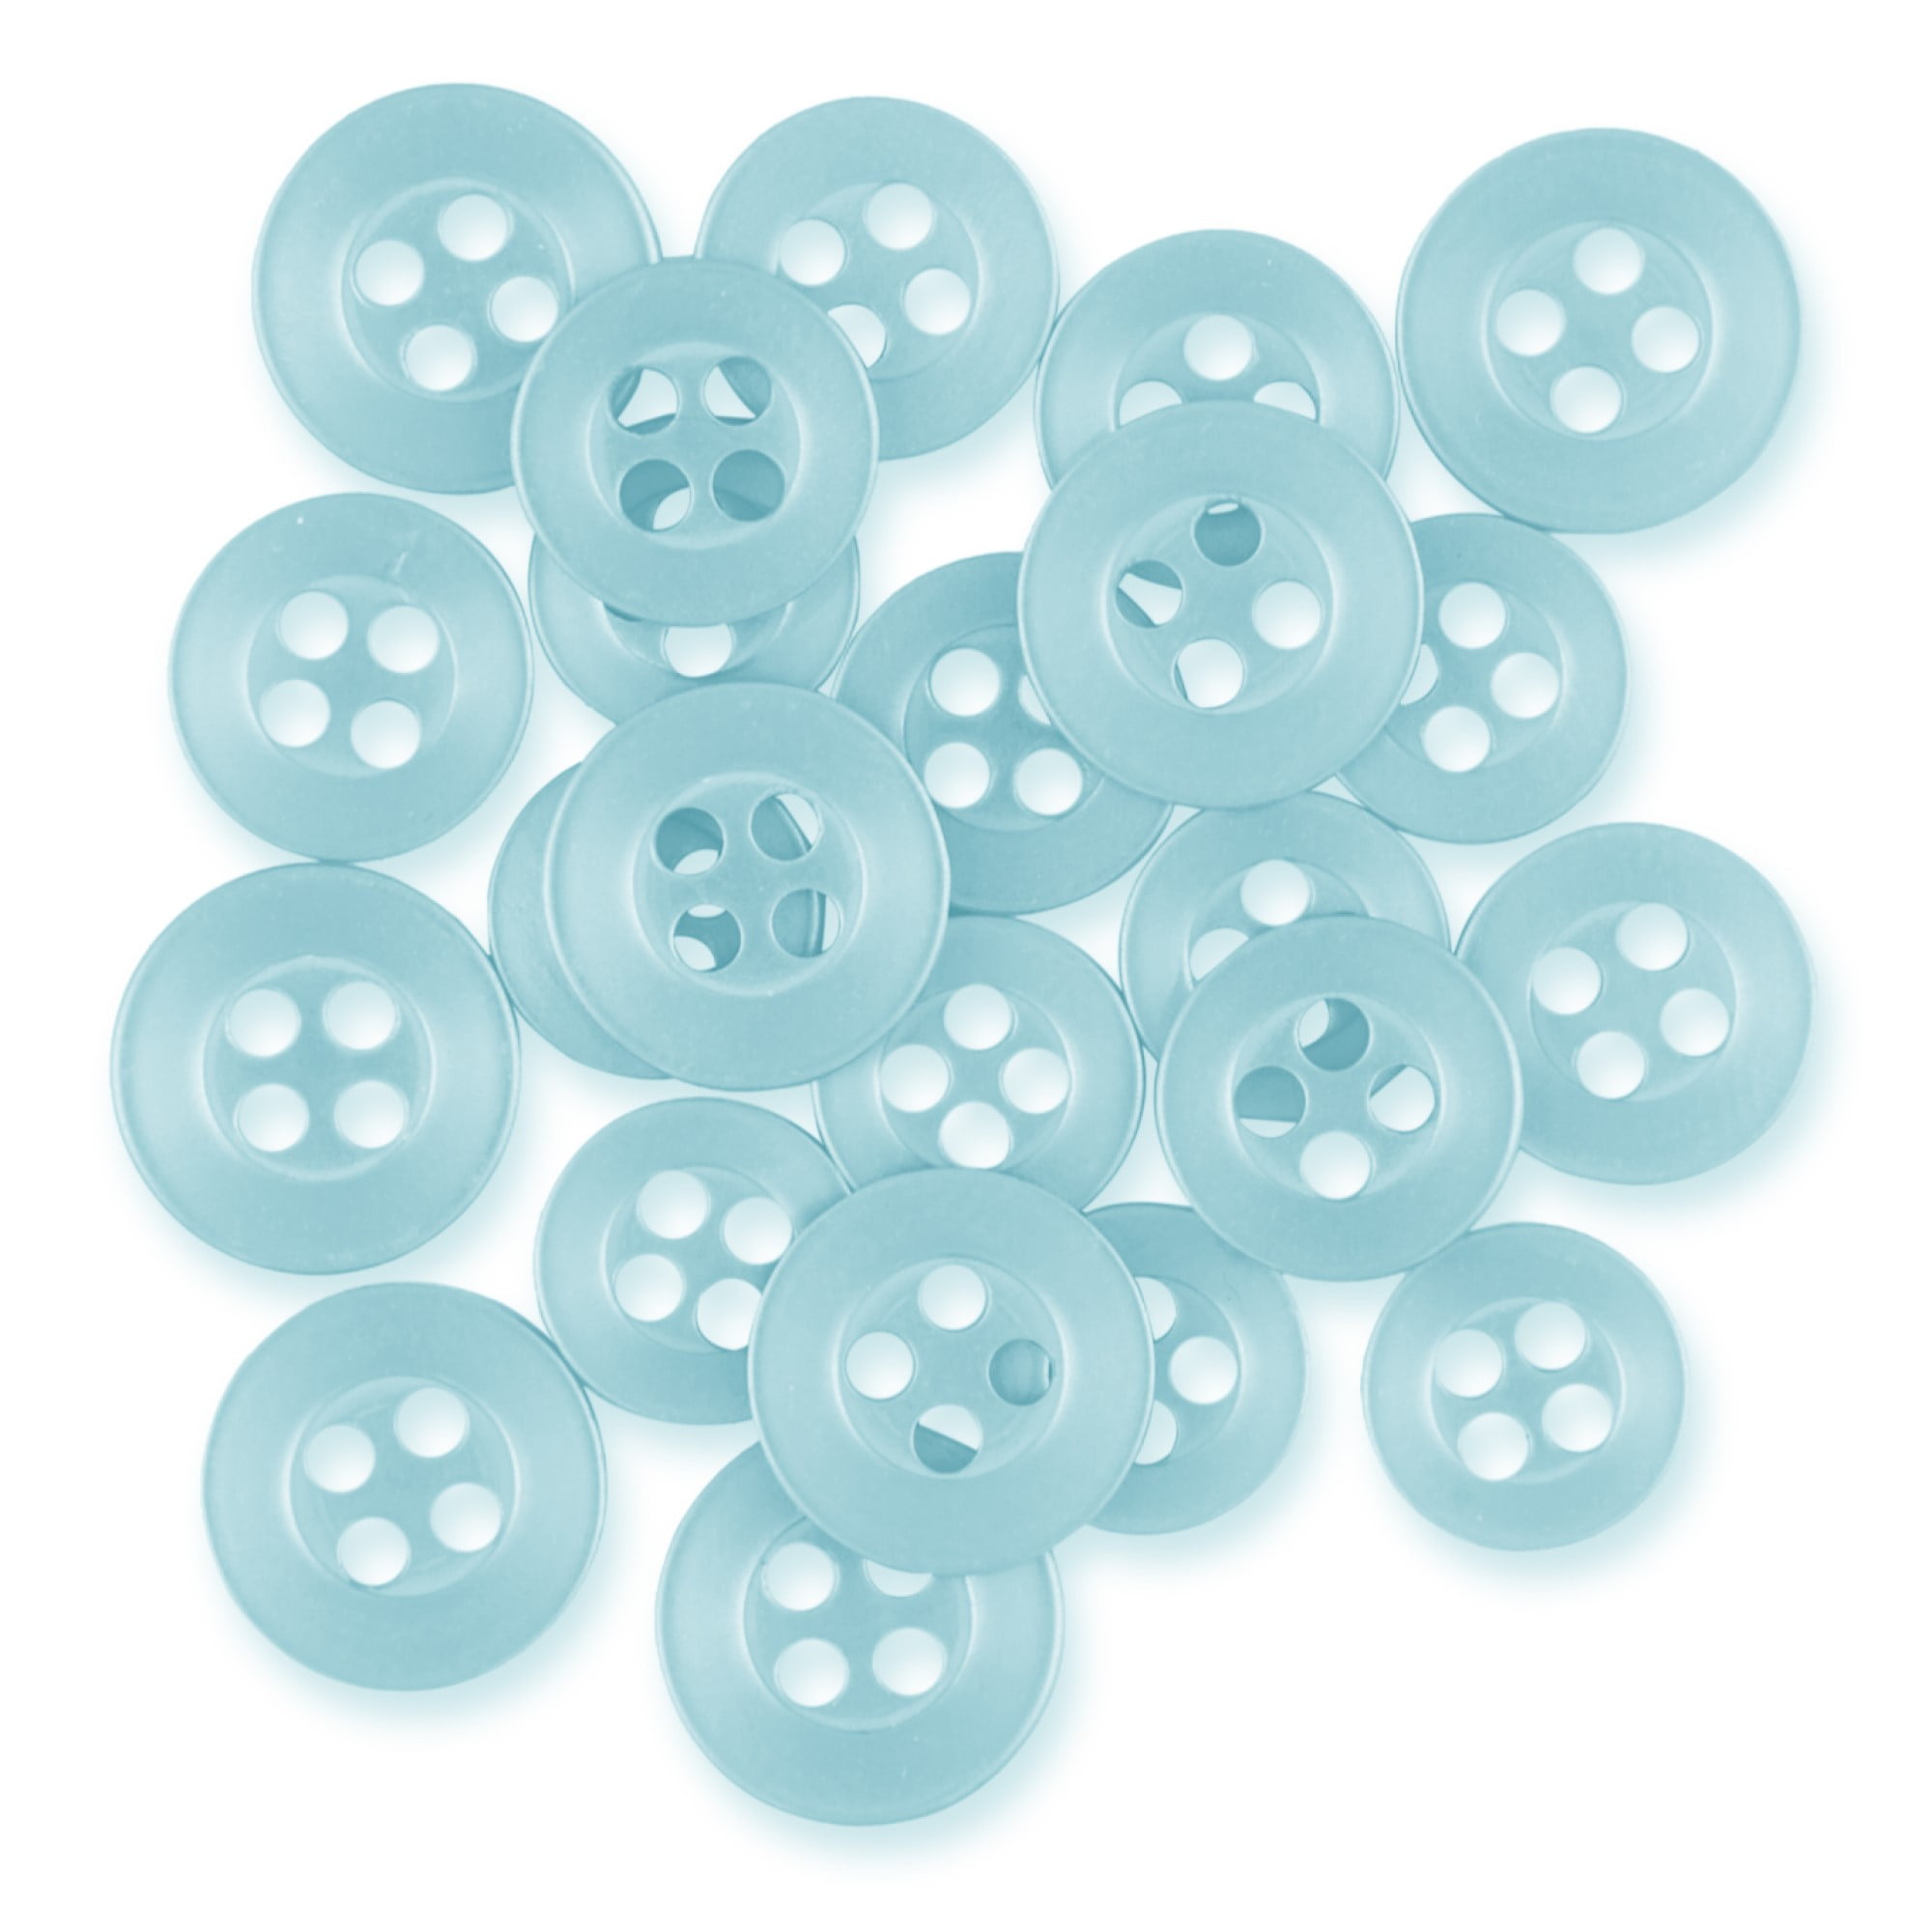 Buttonmode Standard Shirt Buttons 22pc Set Includes 8 Shirt Front Buttons (11mm or 7/16 in), 7 Sleeve Buttons (10mm or 3/8 in) & 7 Collar Buttons (9mm